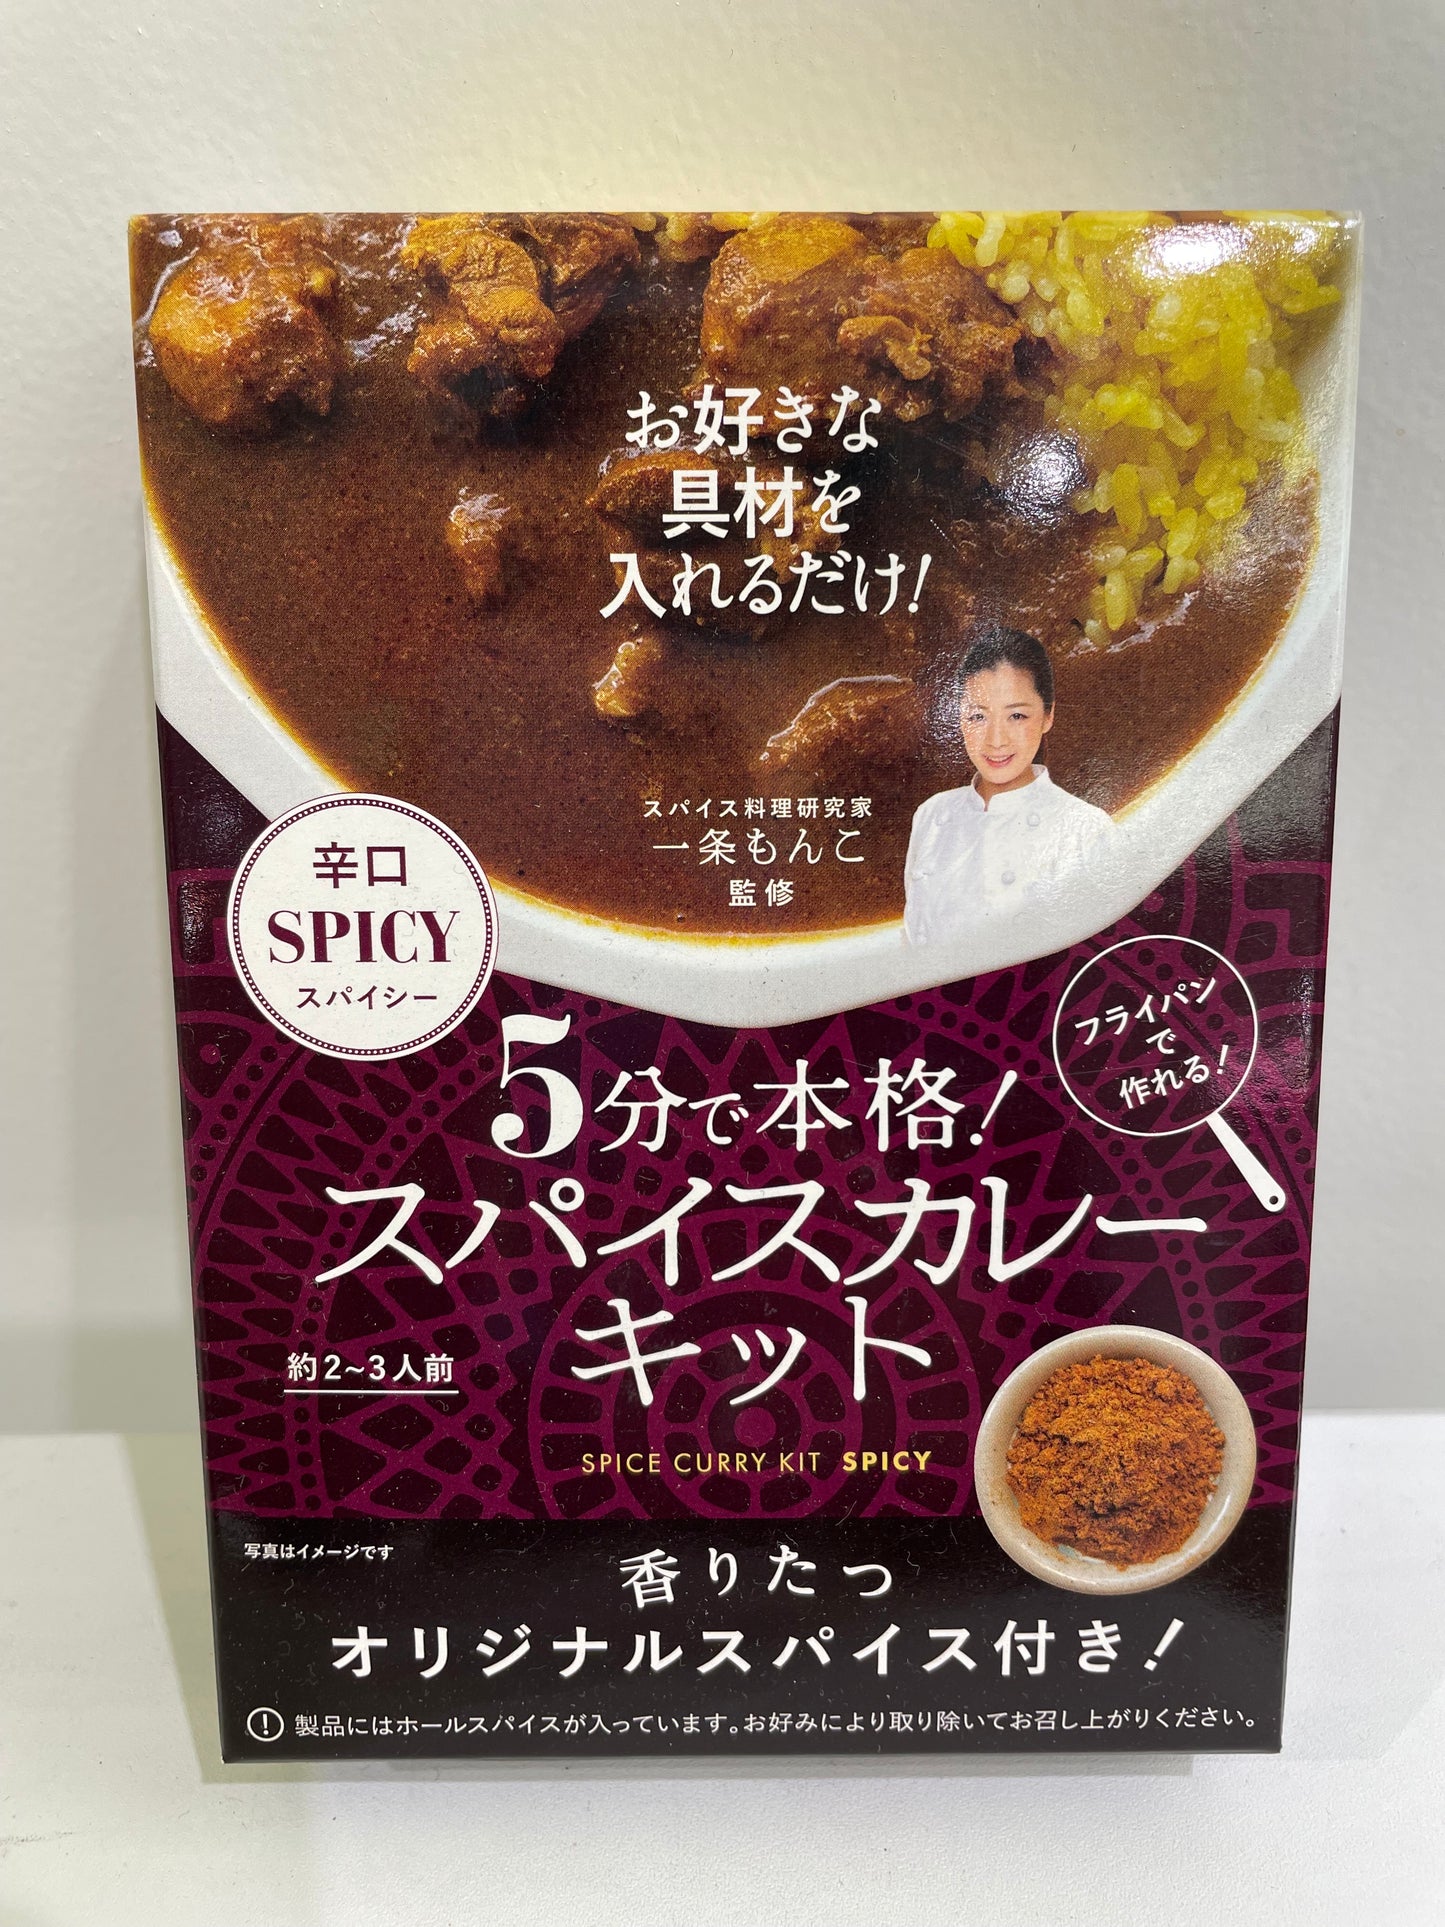 Authentic spice curry kit in 5 minutes, supervised by Monko Ichijo, spicy, 165g